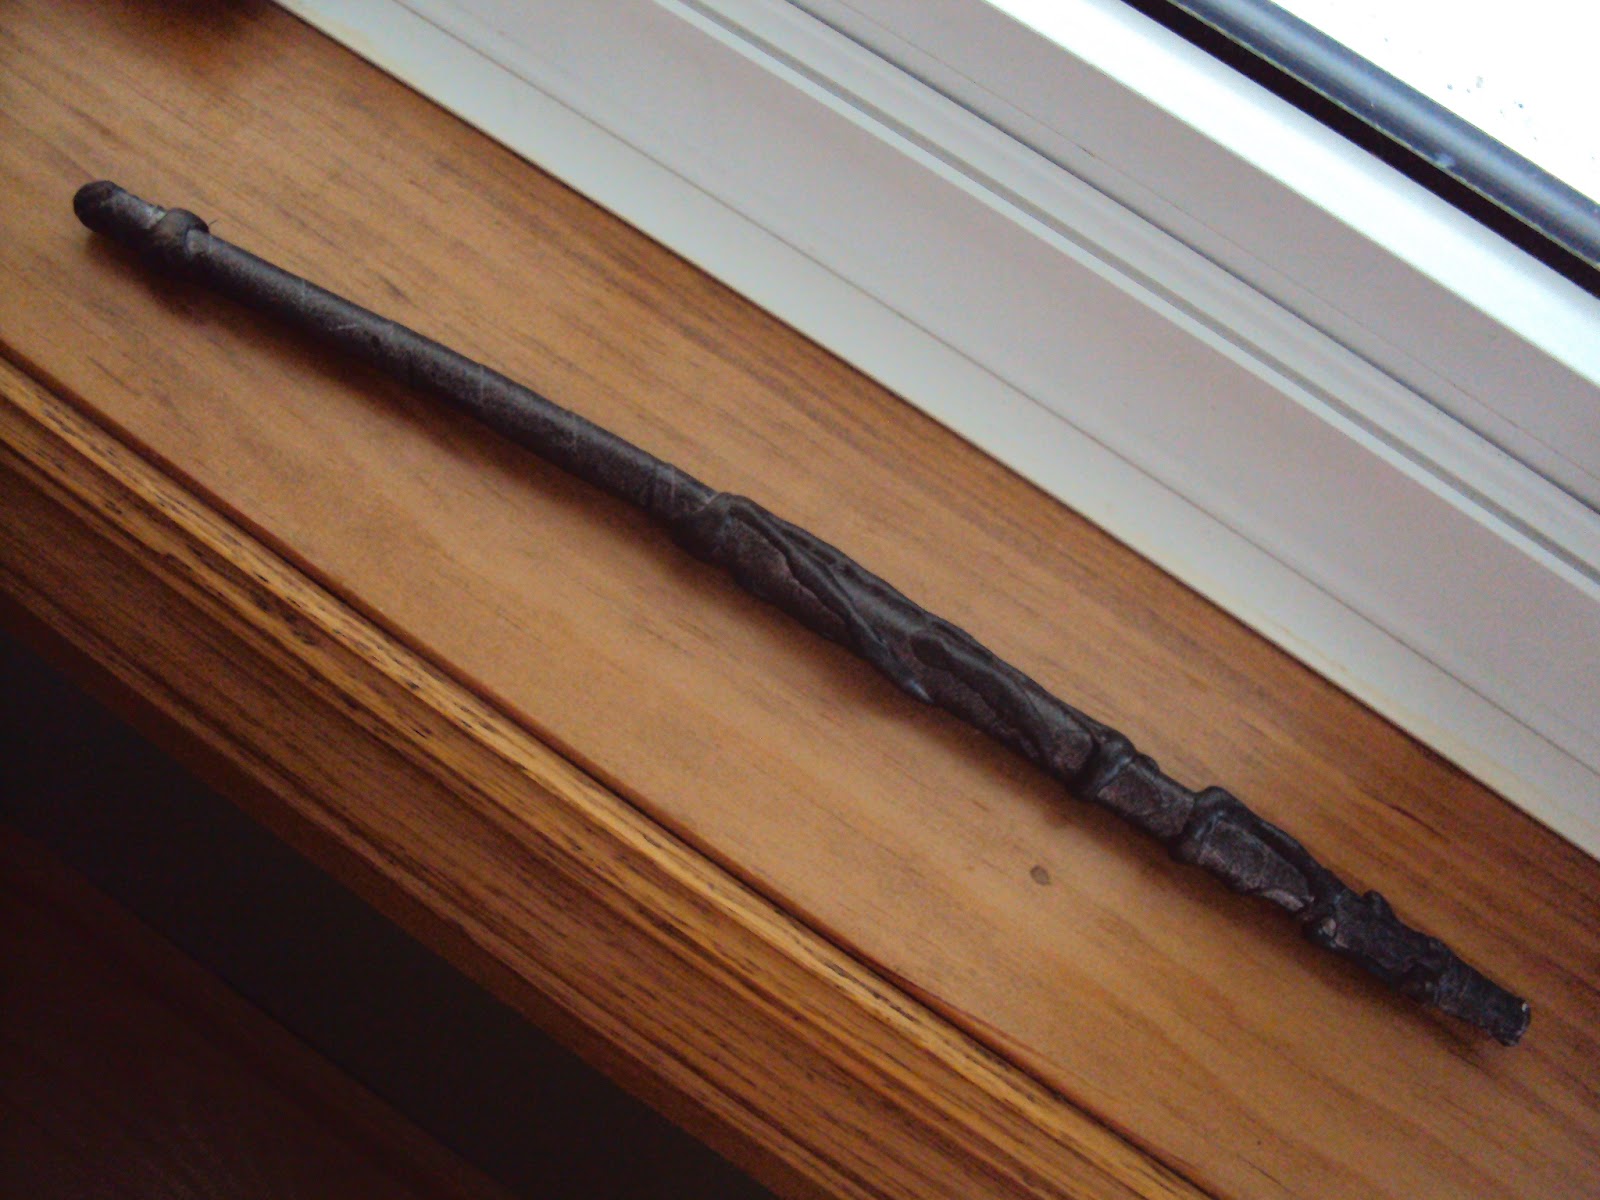 How to Make a Nimbus 2000 : 11 Steps (with Pictures) - Instructables